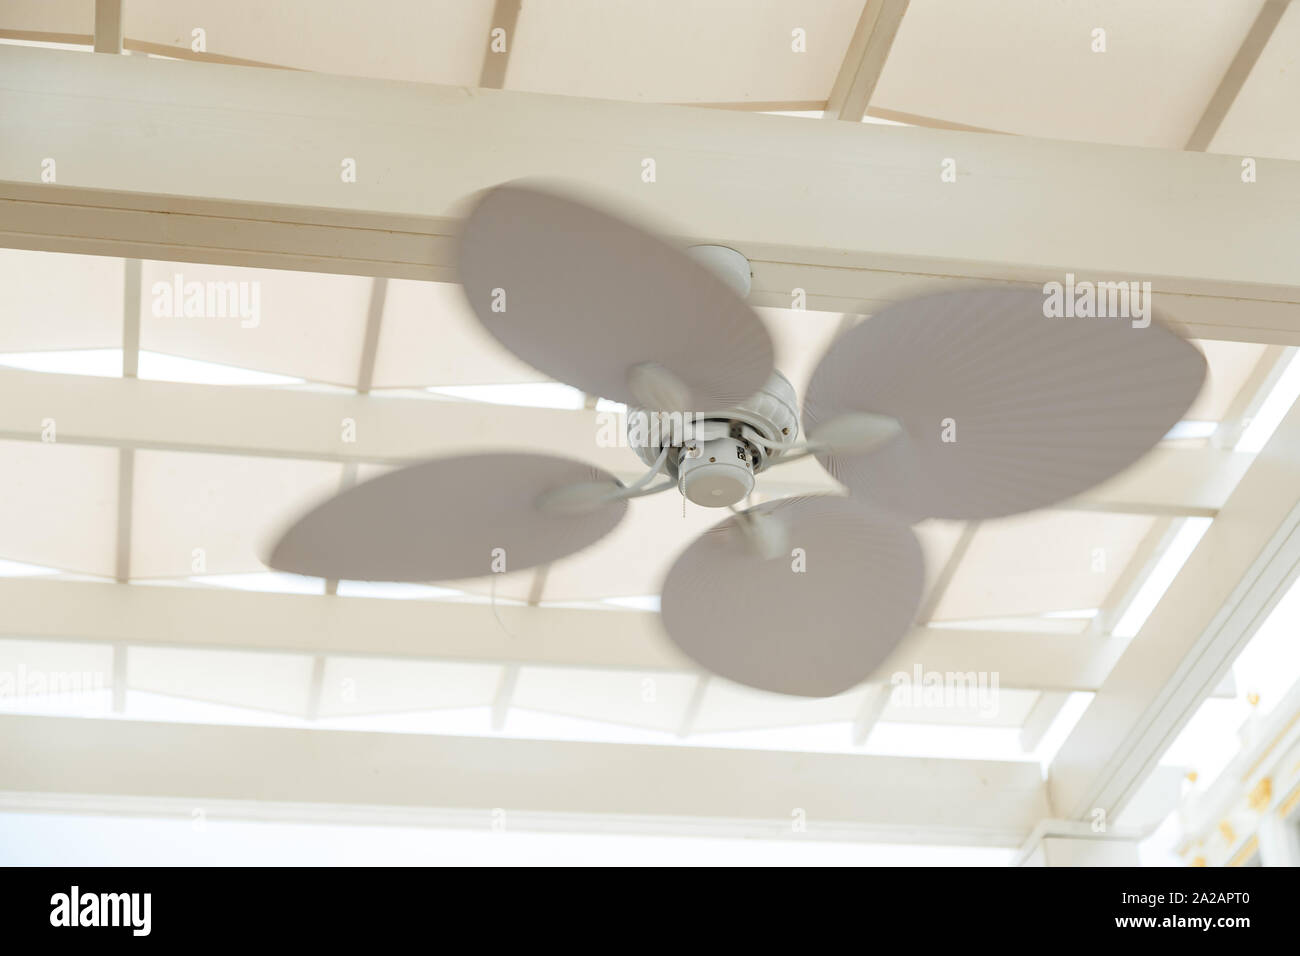 Ceiling Fan In Outdoor Pergola Cafe Stock Photo 328463744